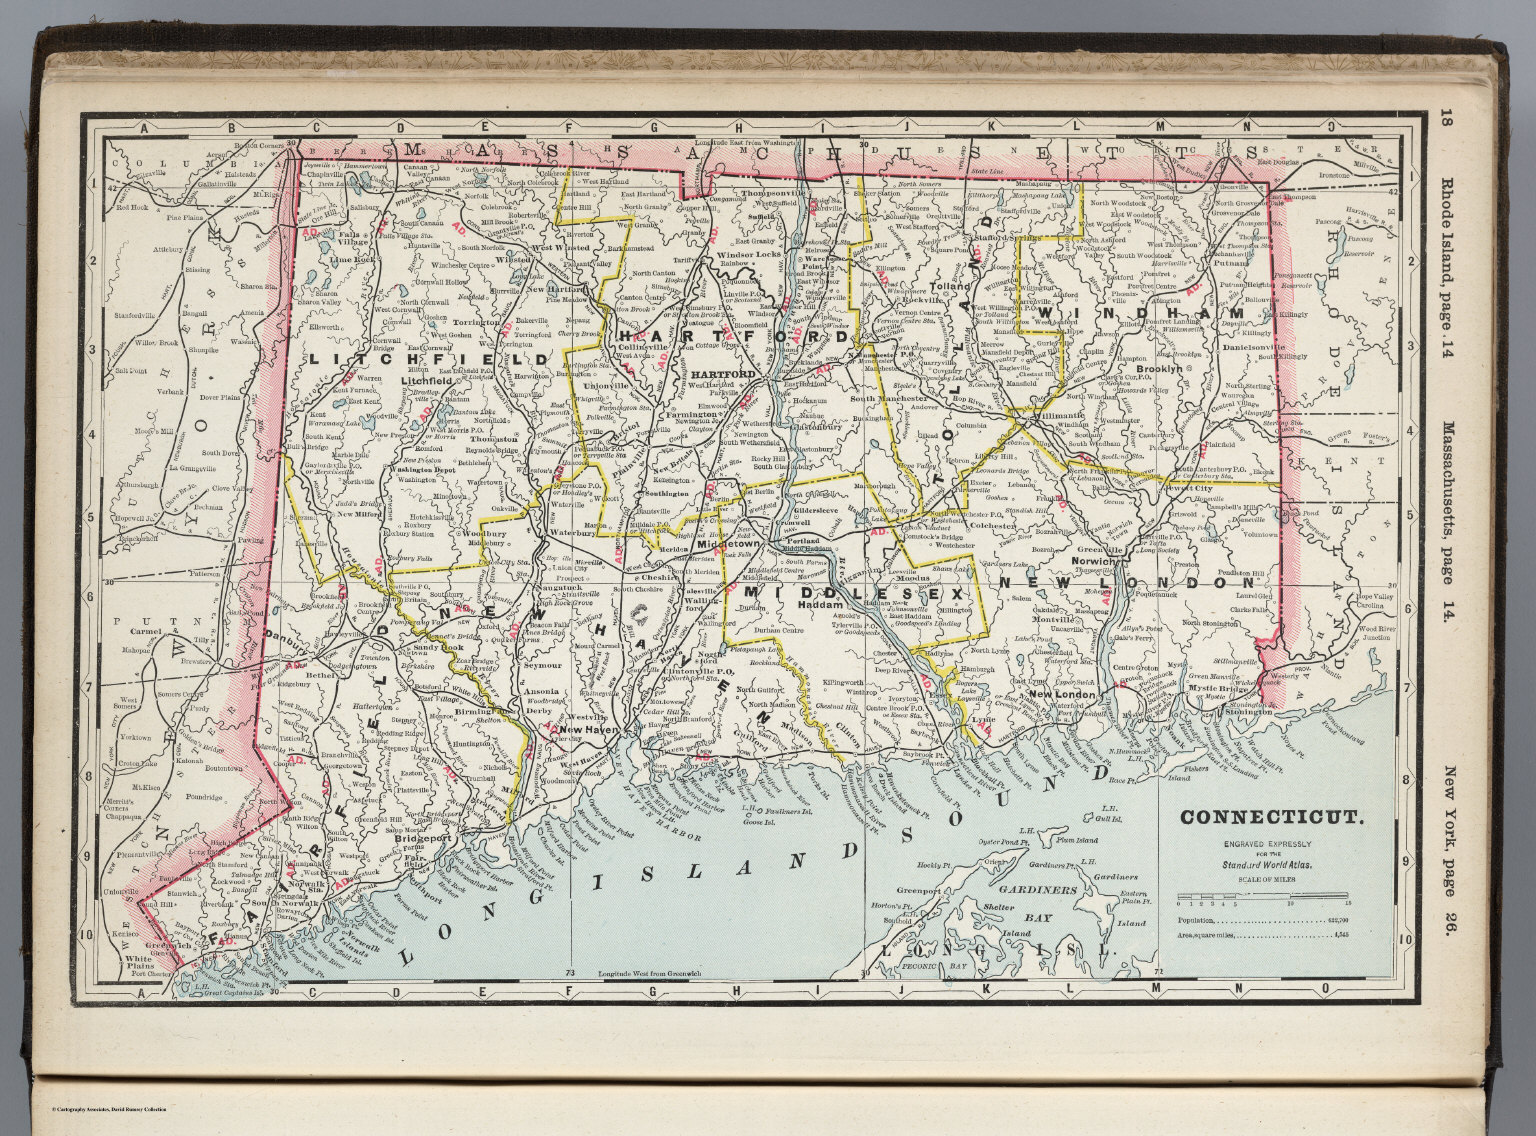 Connecticut David Rumsey Historical Map Collection